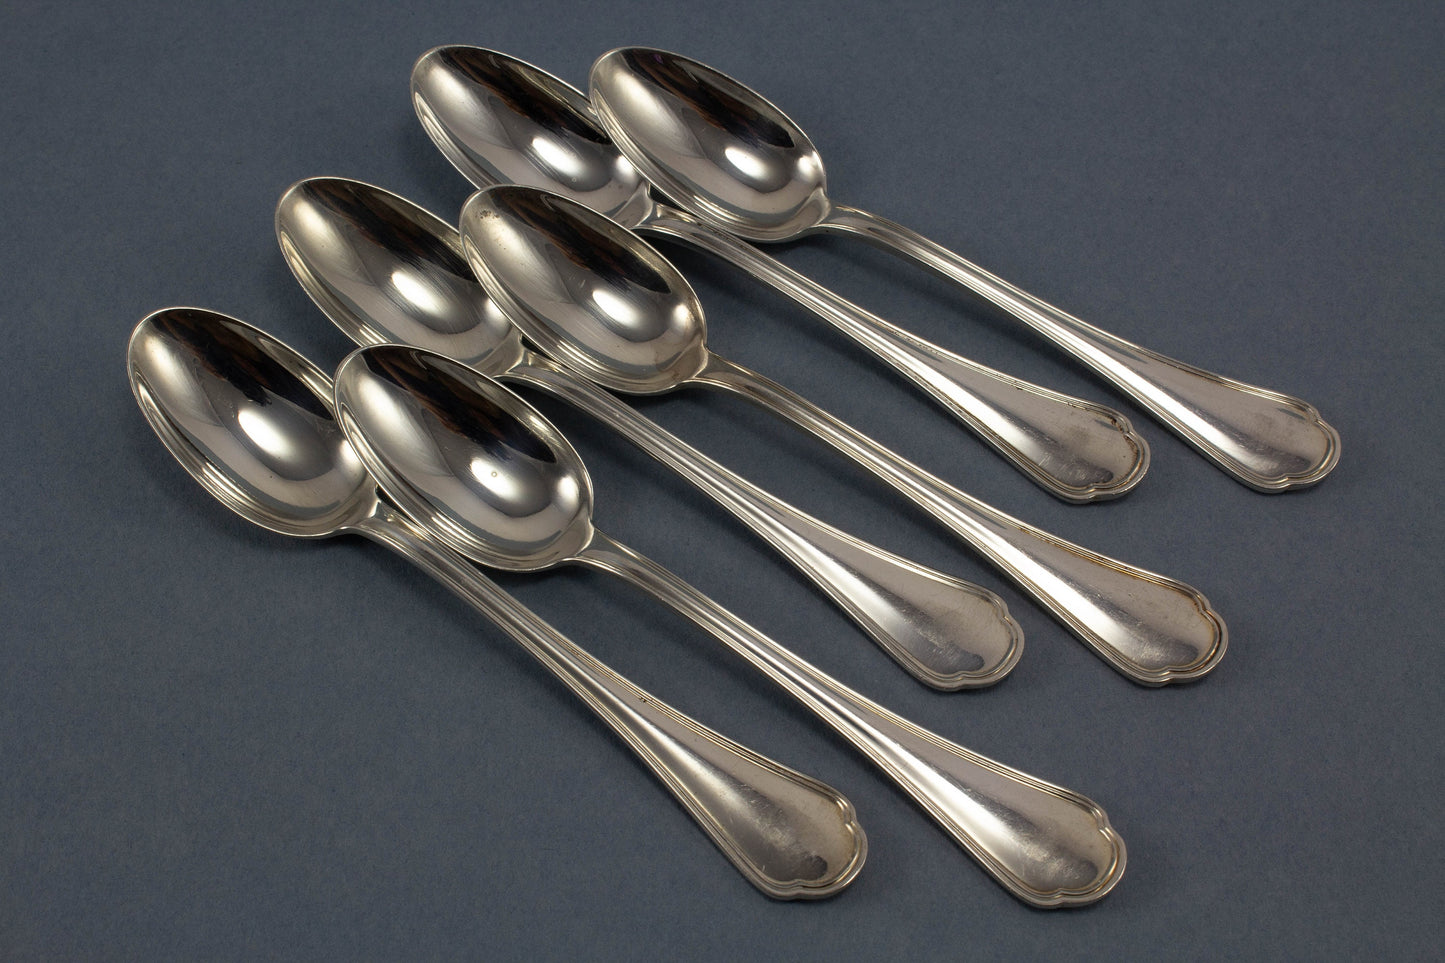 6 mocha spoons made of 800 silver, silver cutlery